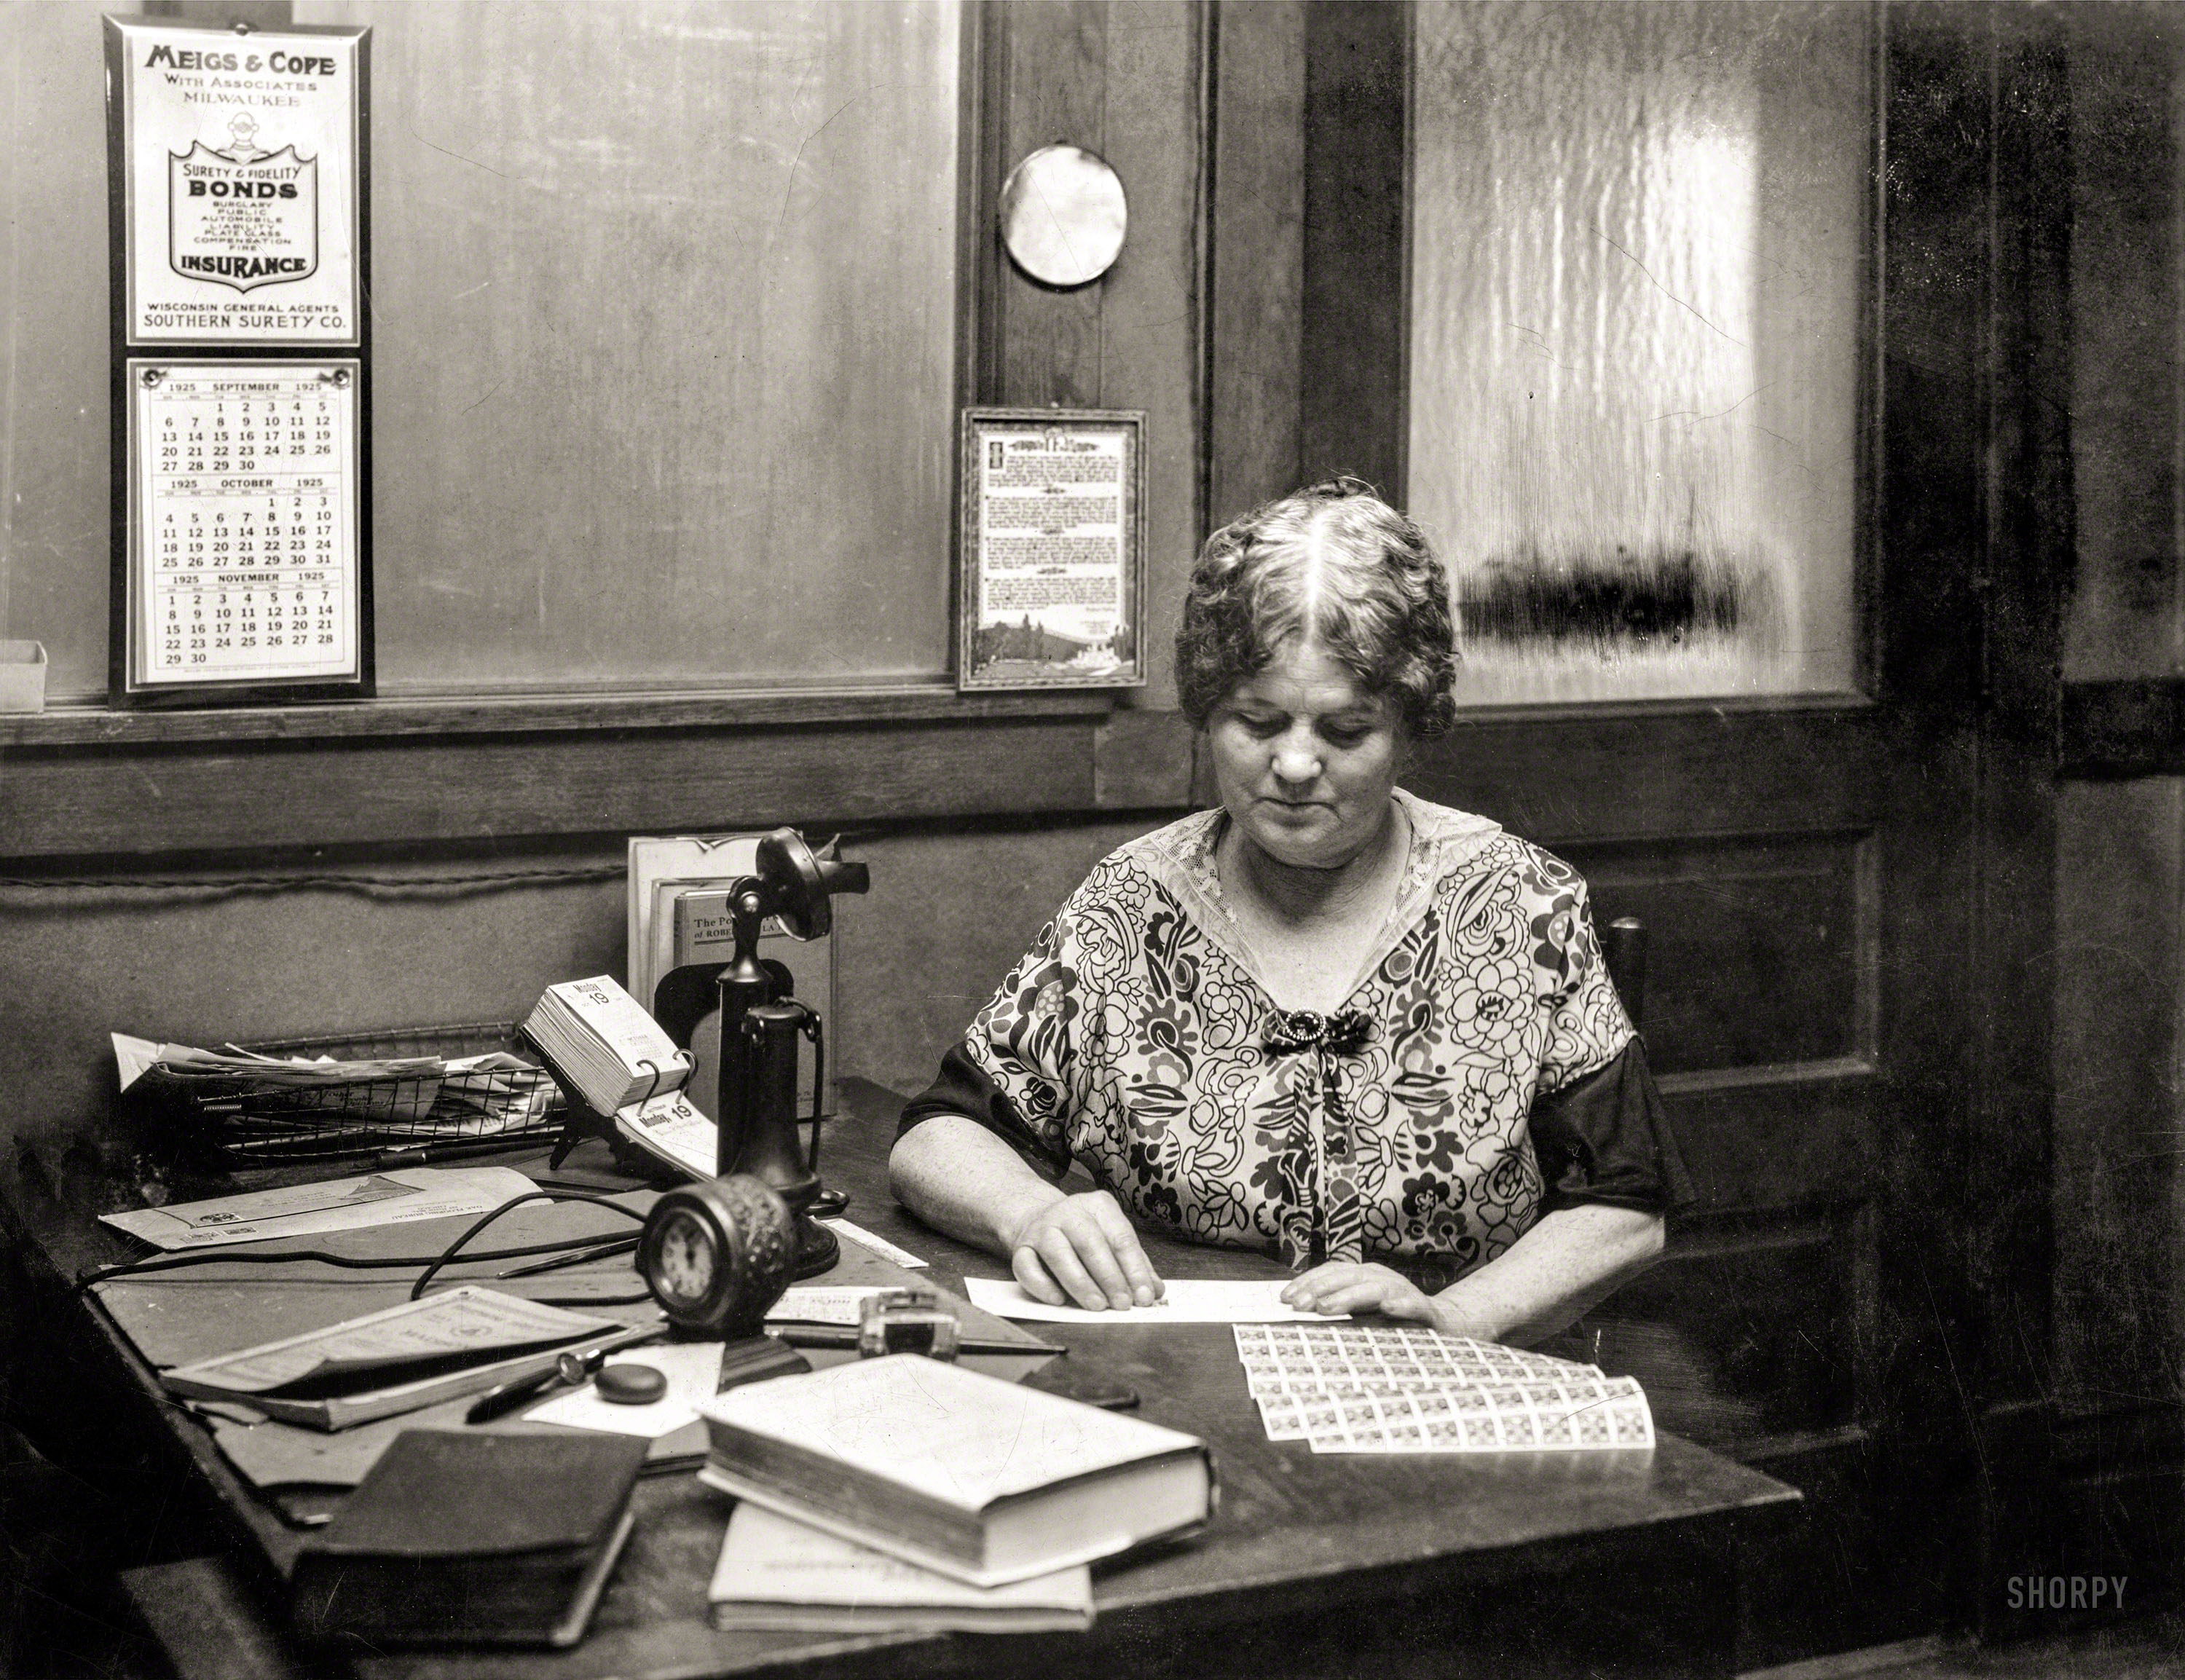 There's no caption for this yellowing print of a lady at an office desk with postage stamps (quite possibly on October 19, 1925). Yet there must be some reason it's in the Library of Congress Prints & Photographs Online Catalog. View full size.